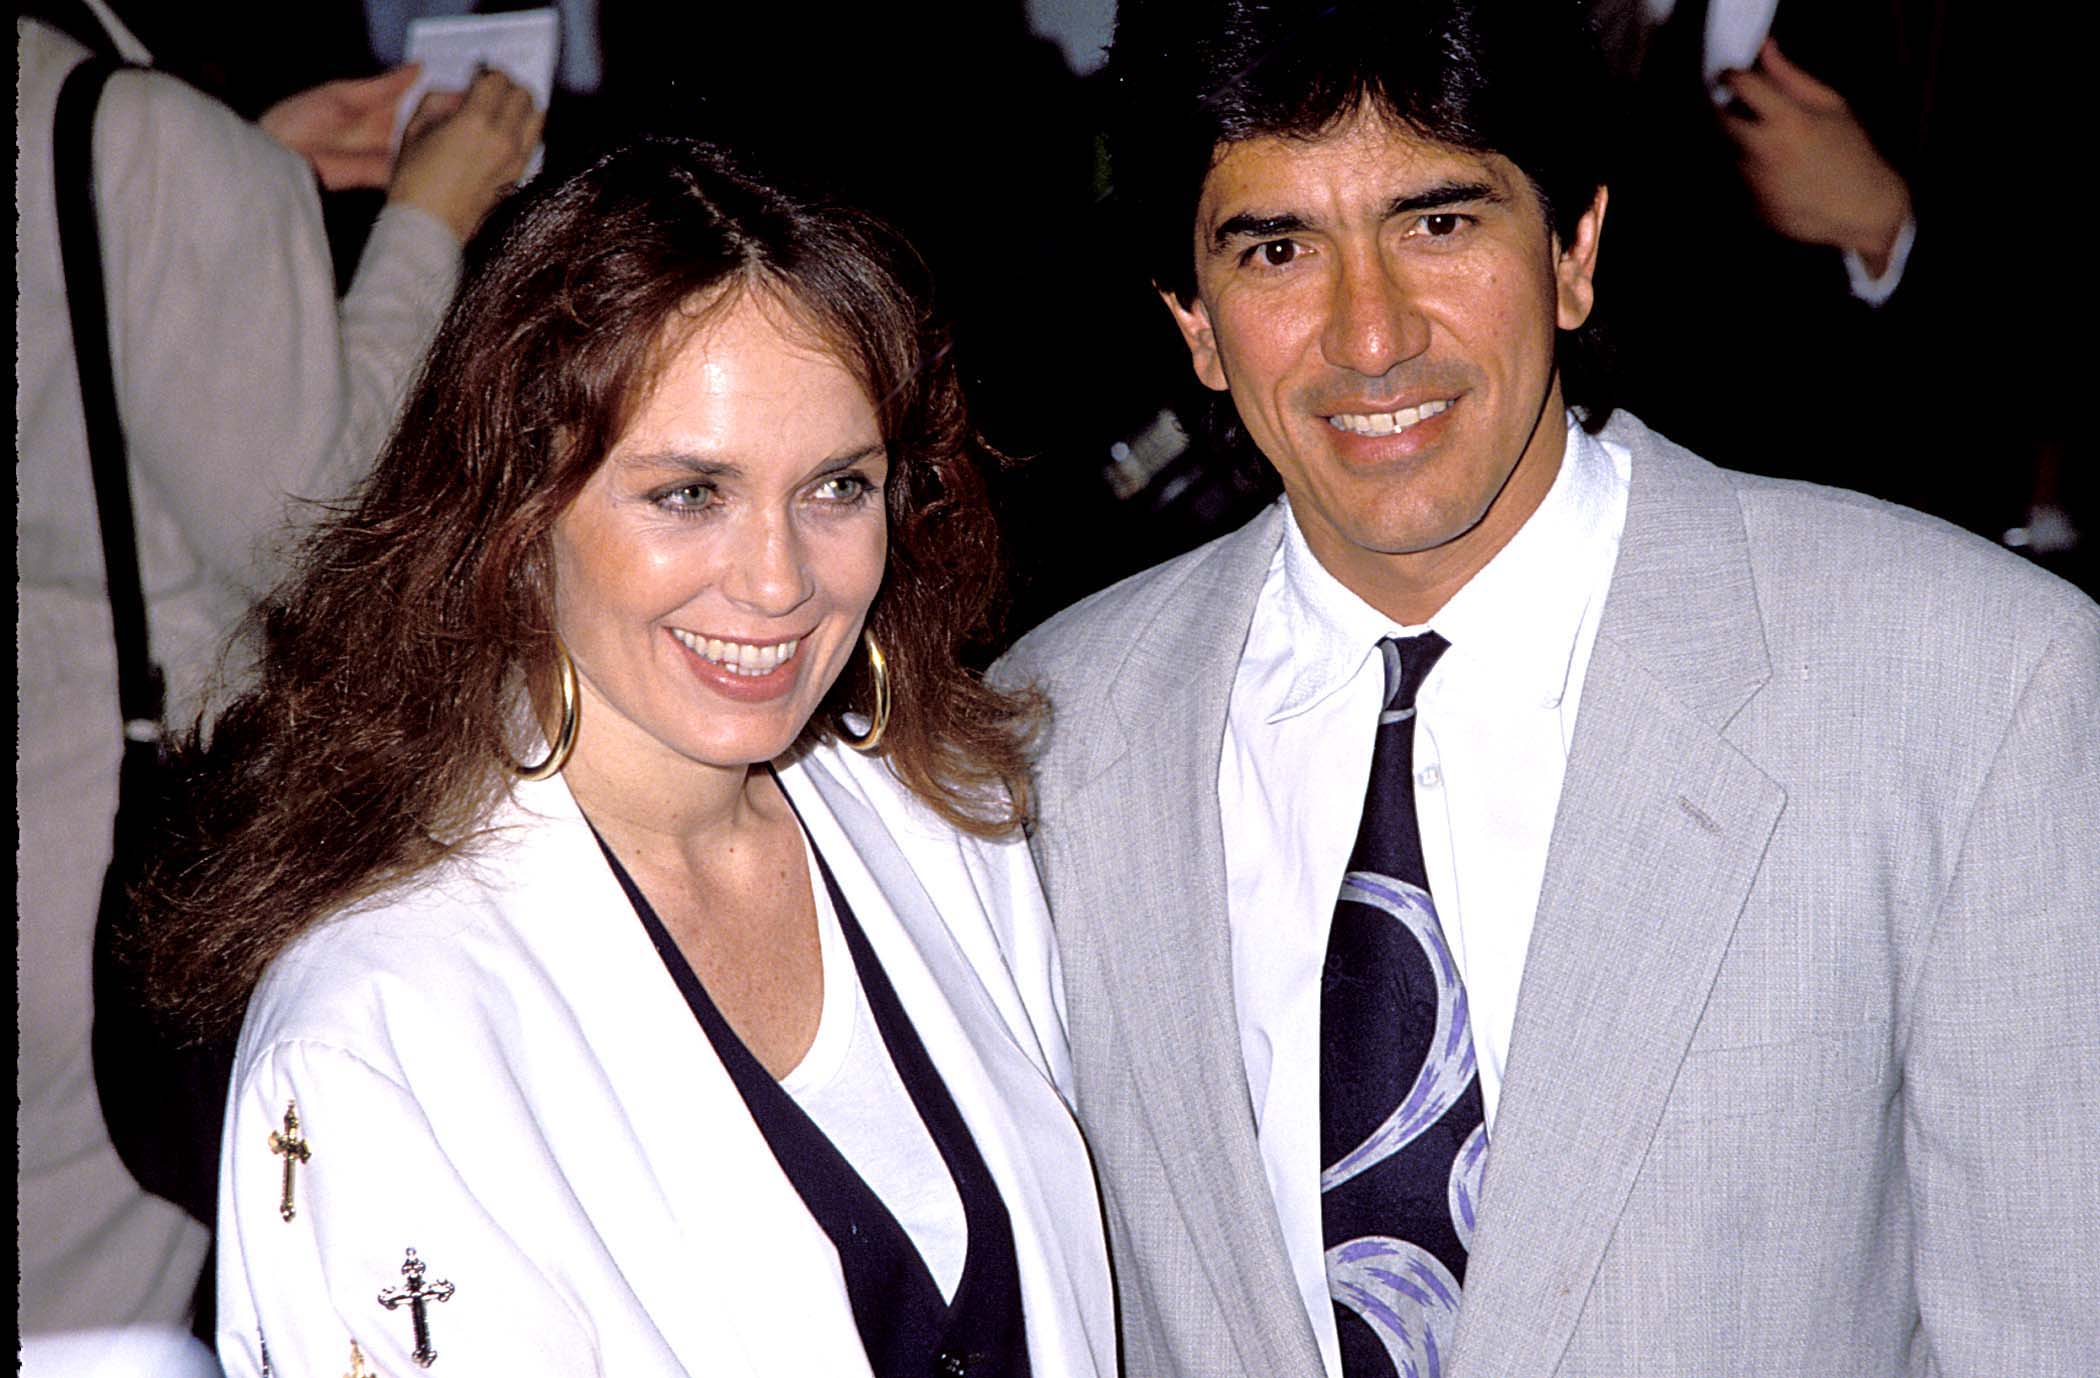 Catherine Bach and Peter Lopez during the "Dream Team" premiere in Los Angeles, California, on April 9, 1989 | Source: Getty Images